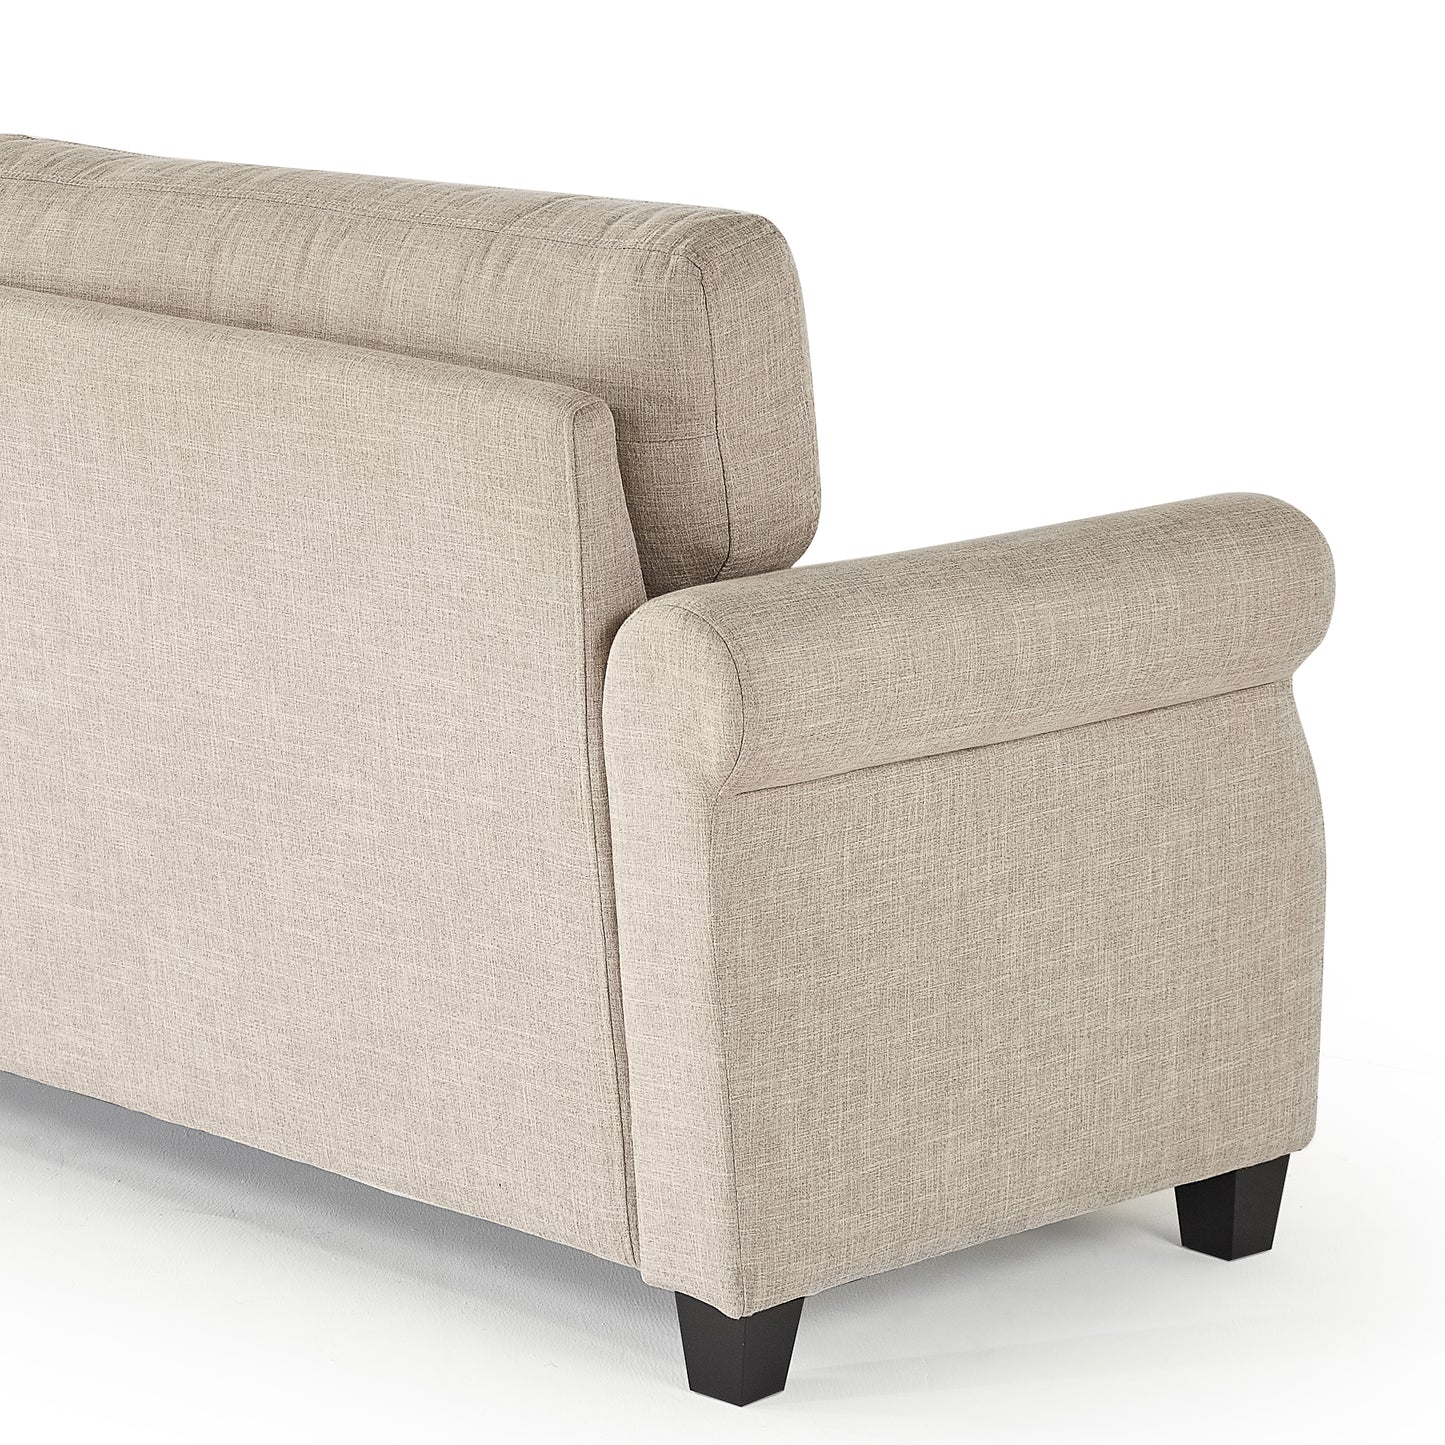 Josh Contemporary Upholstered Sofa - Beige (2-Seaters)